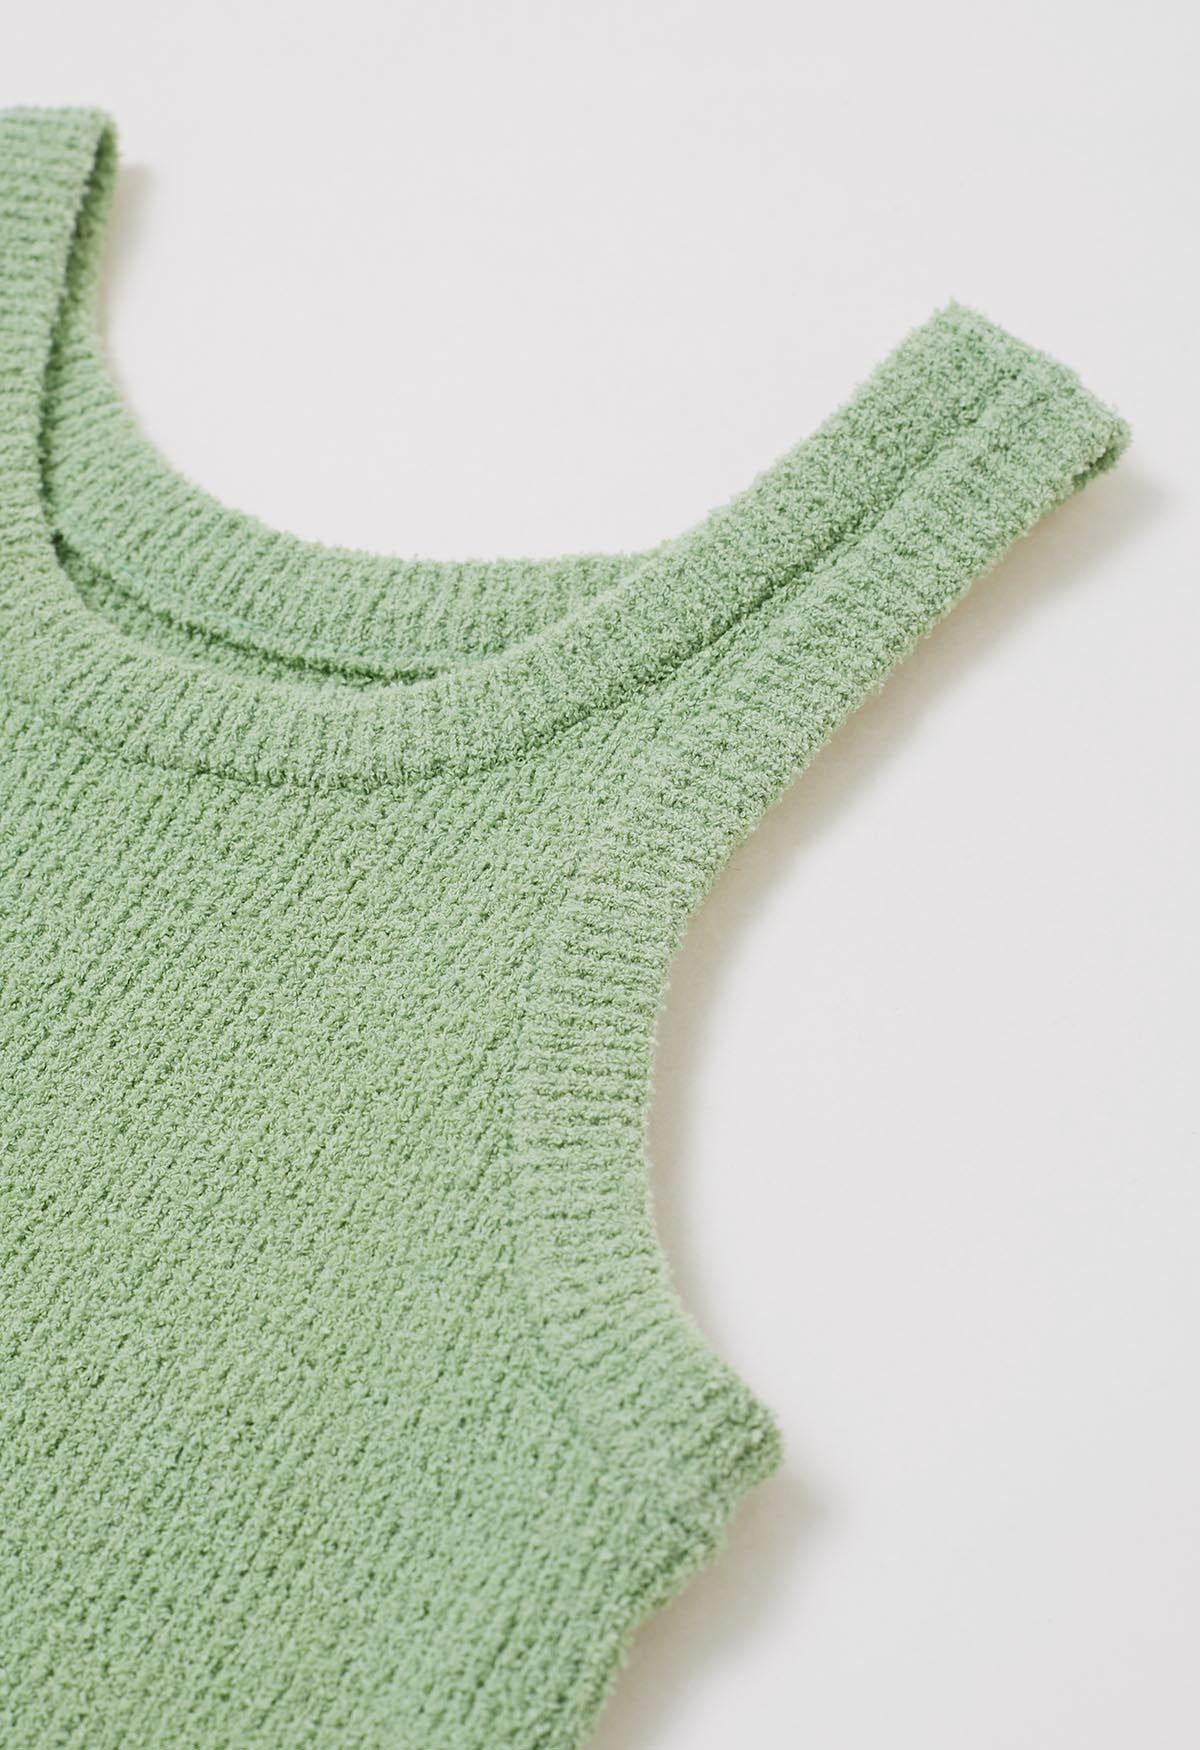 Solid Cropped Knit Tank Top in Pistachio